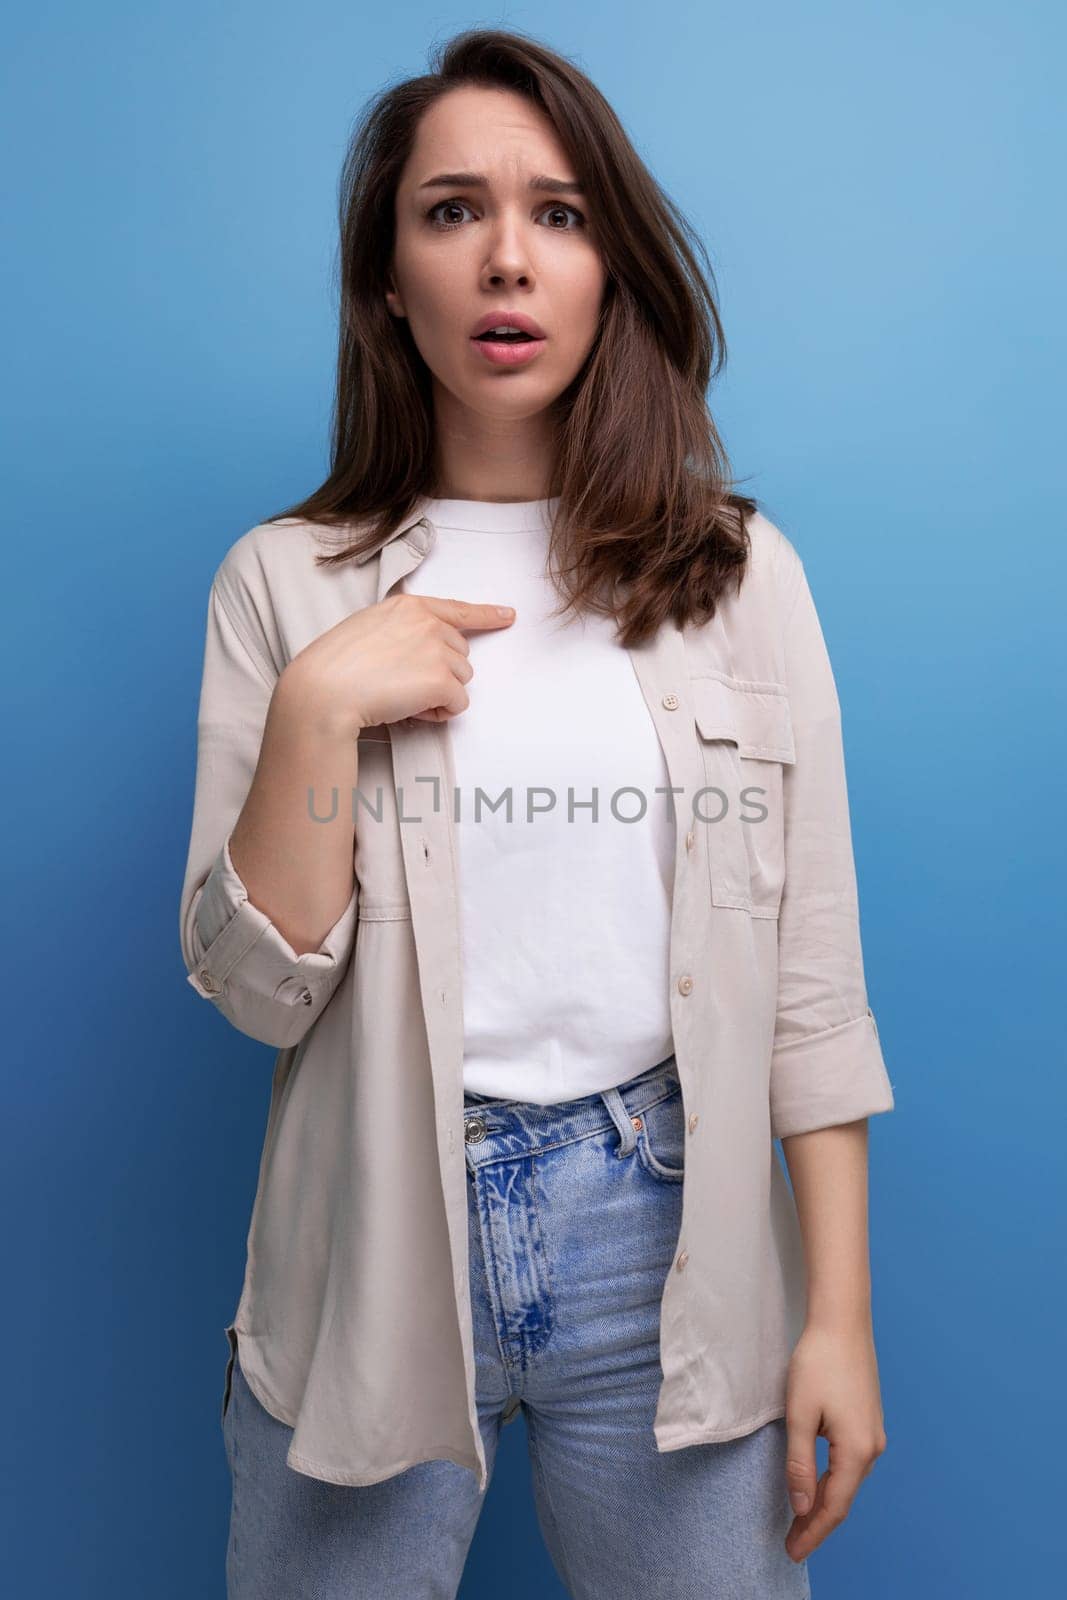 upset surprised young brunette female adult in casual shirt on blue background.